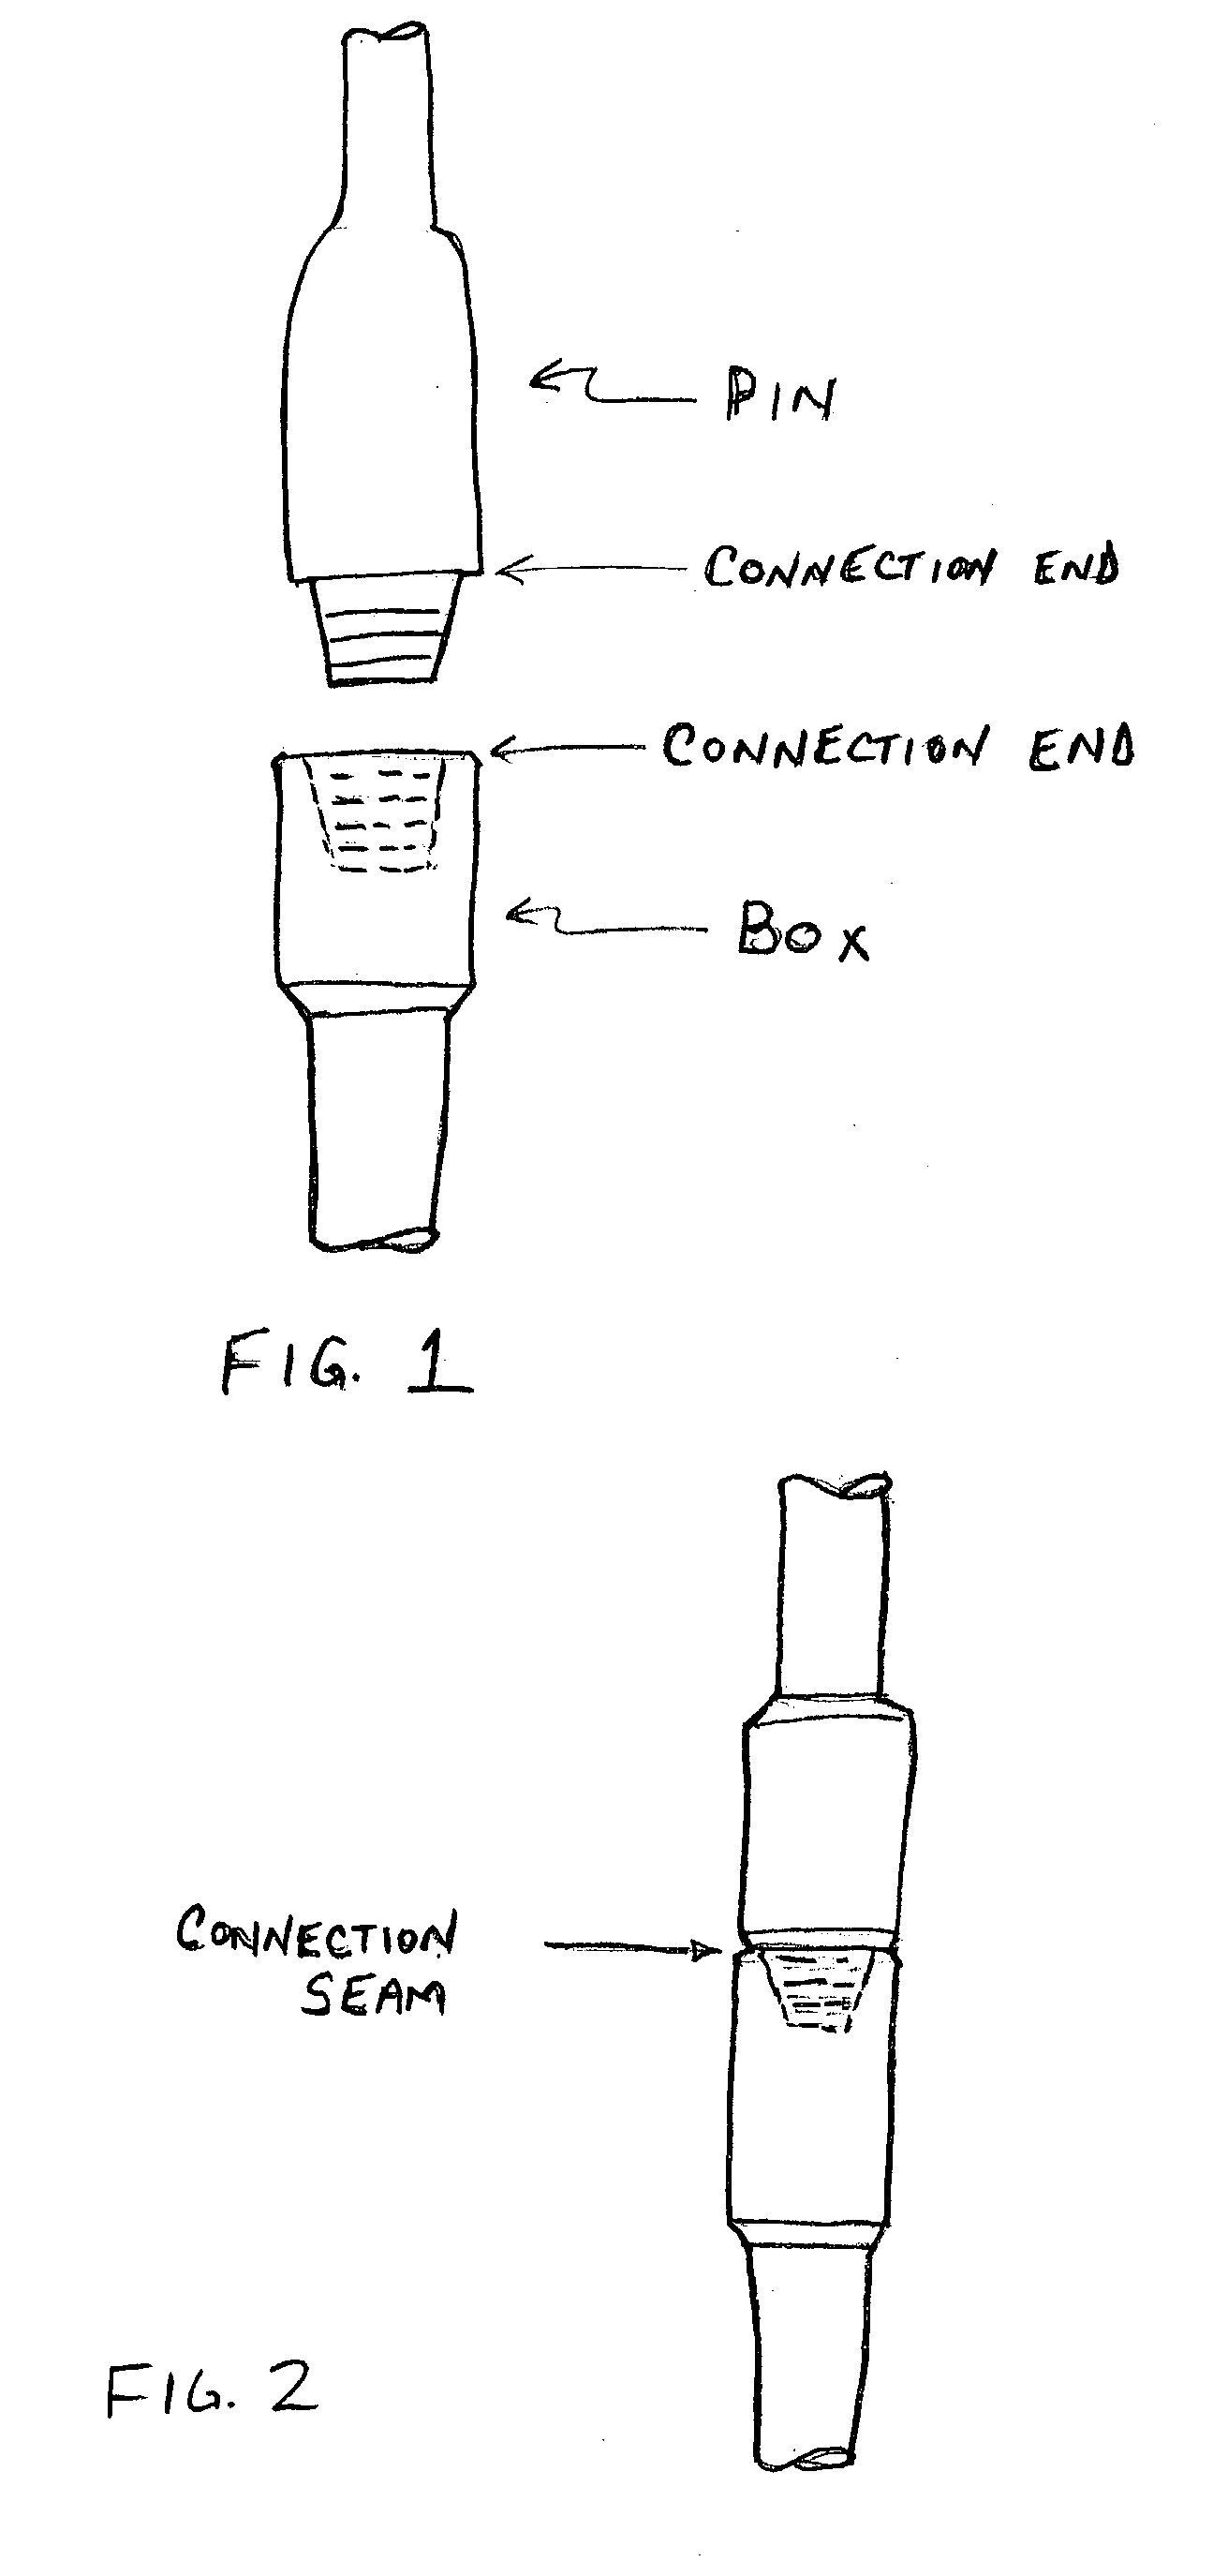 Apparatus and method for determining the position of the end of a threaded connection, and for positioning a power tong relative thereto